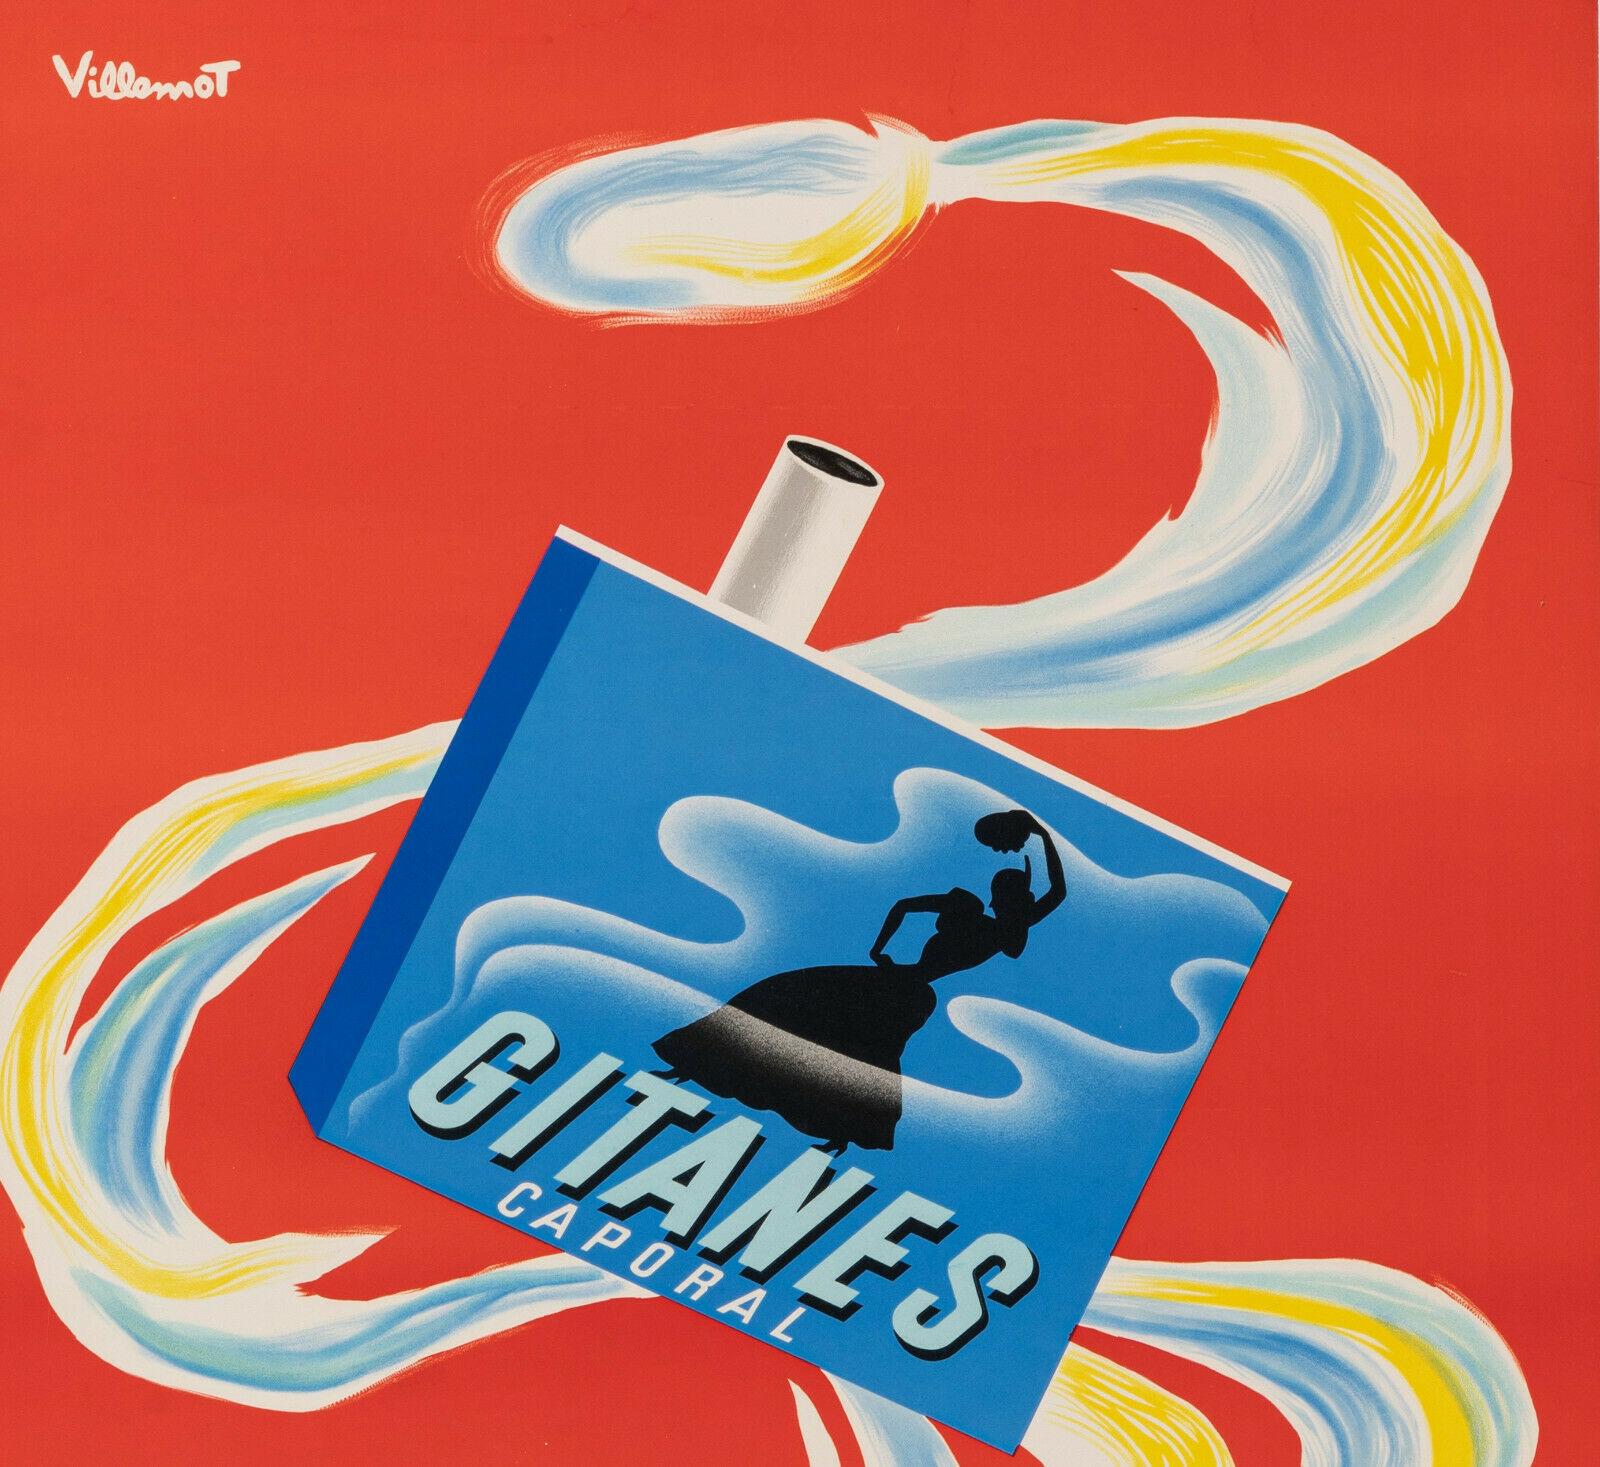 Original Vintage Poster-Bernard Villemot-Gitanes-Tabac-France, 1957

Poster to promote Gitanes cigarettes.
Gitanes is a brand of cigarettes produced by Seita, a subsidiary of the Imperial Brands group, created in 1910 at the same time as the